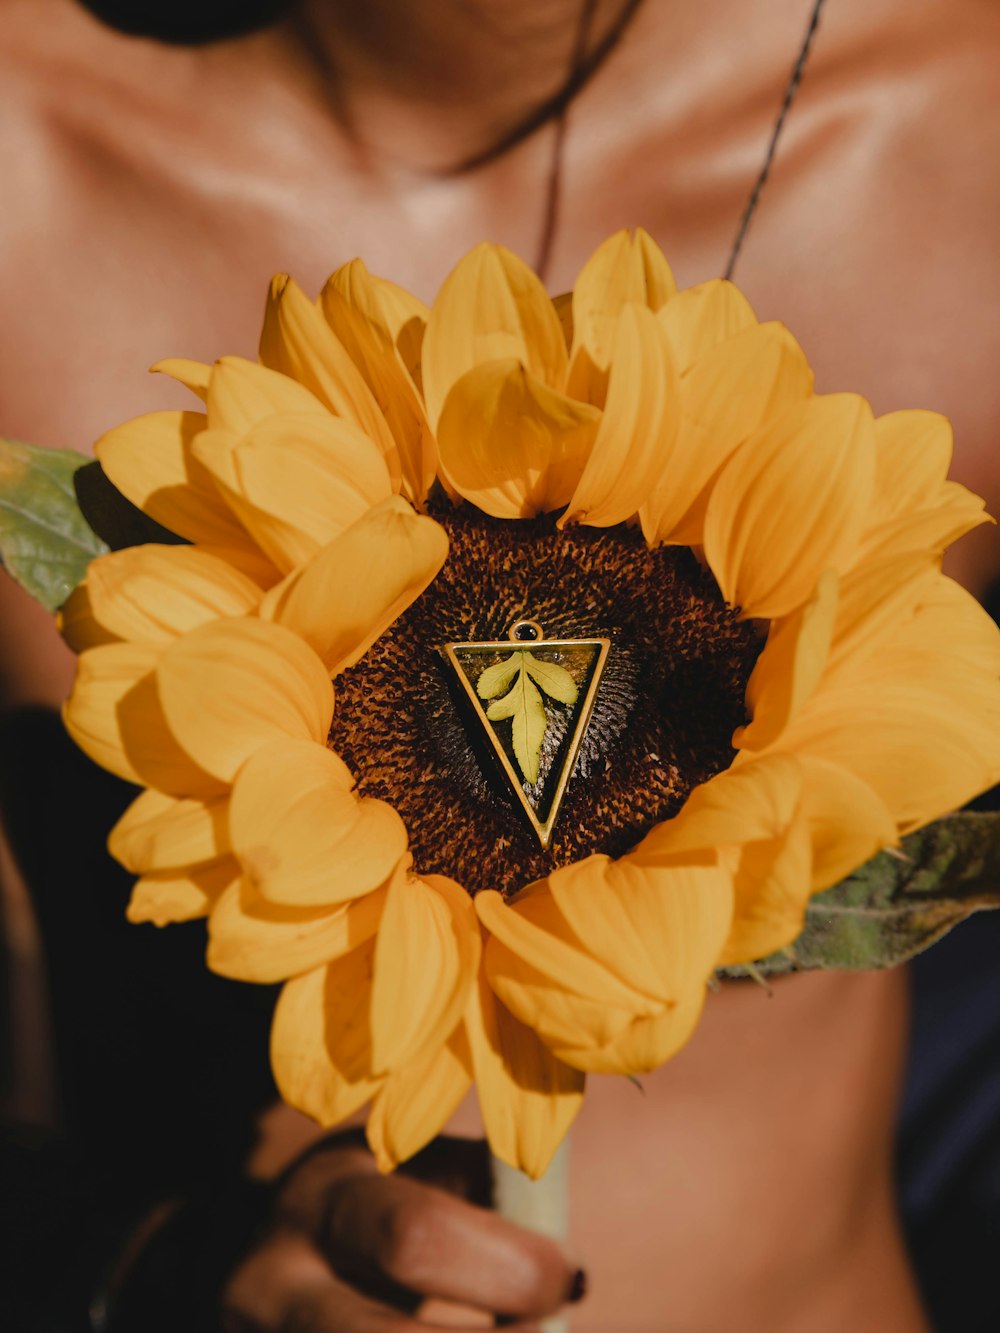 a woman holding a sunflower with a triangle on it